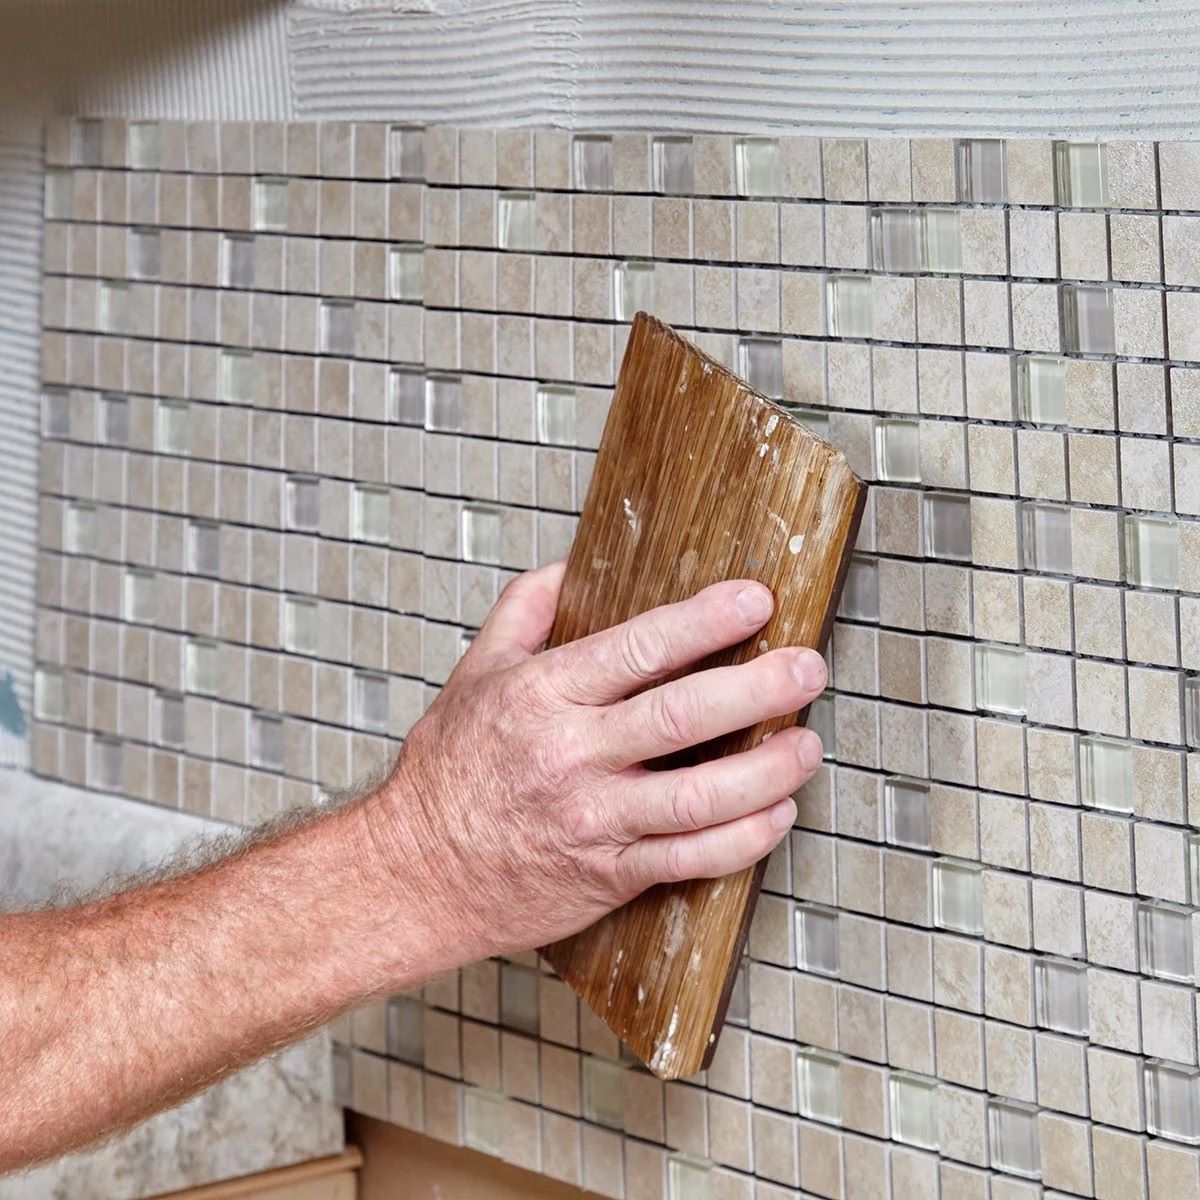 How To Install Glass Mosaic Tiles With Mesh Backing